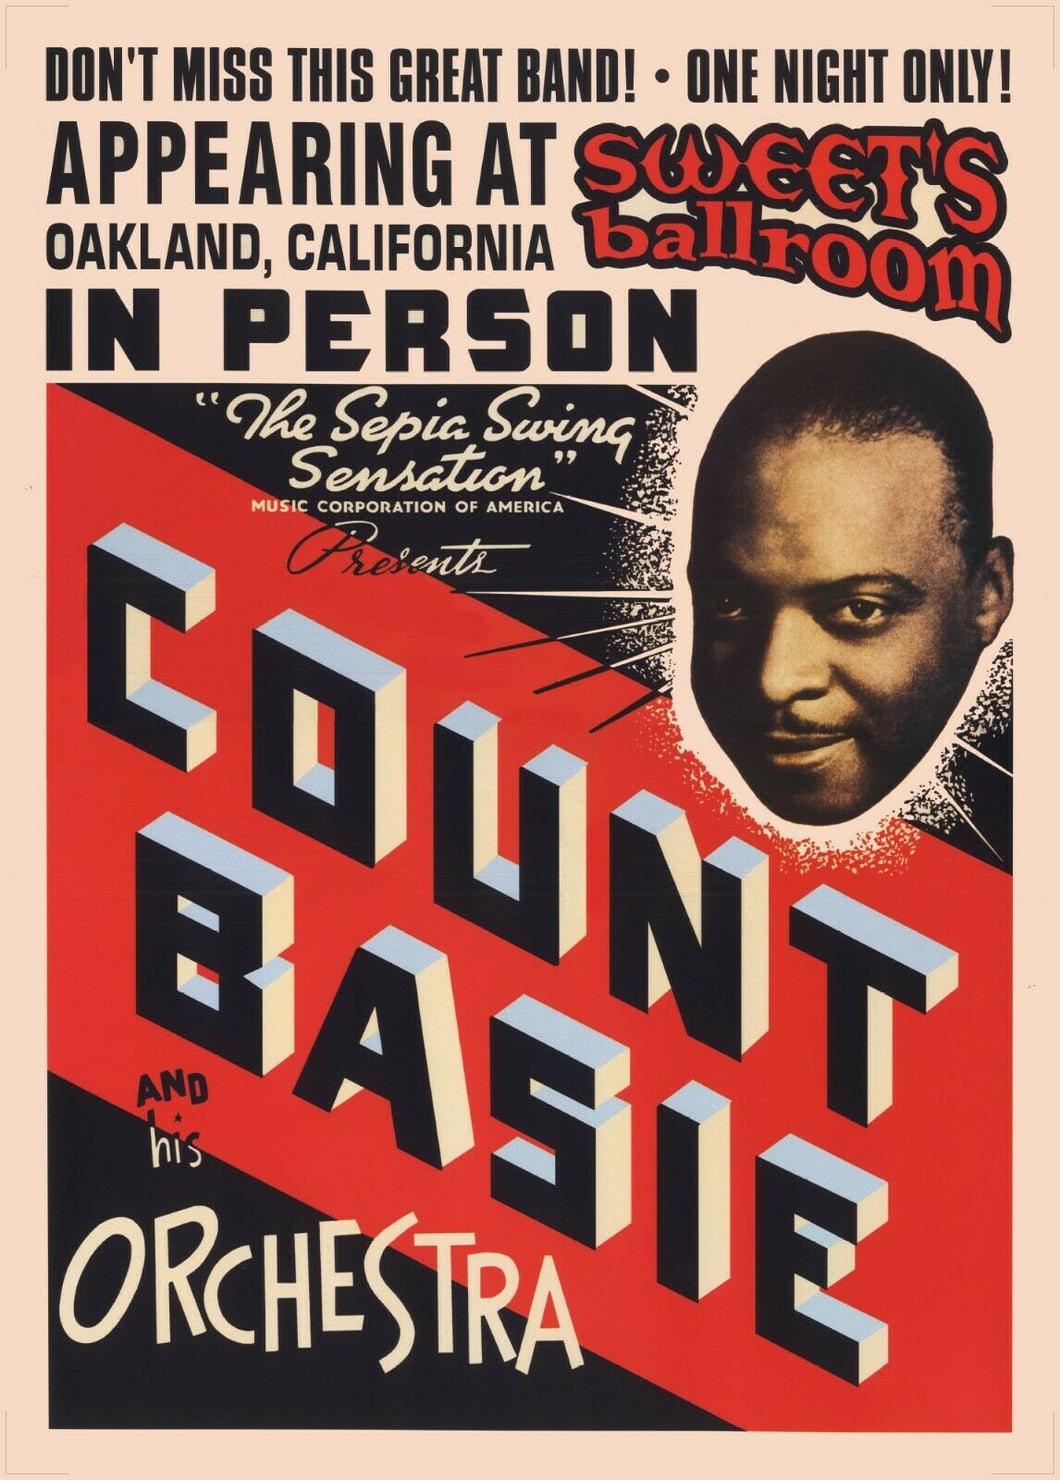 COUNT BASIE CONCERT PROMO POSTER - LIVE OAKLAND CALIFORNIA USA A2 size - Original Music and Movie Posters for sale from Bamalama - Online Poster Store UK London